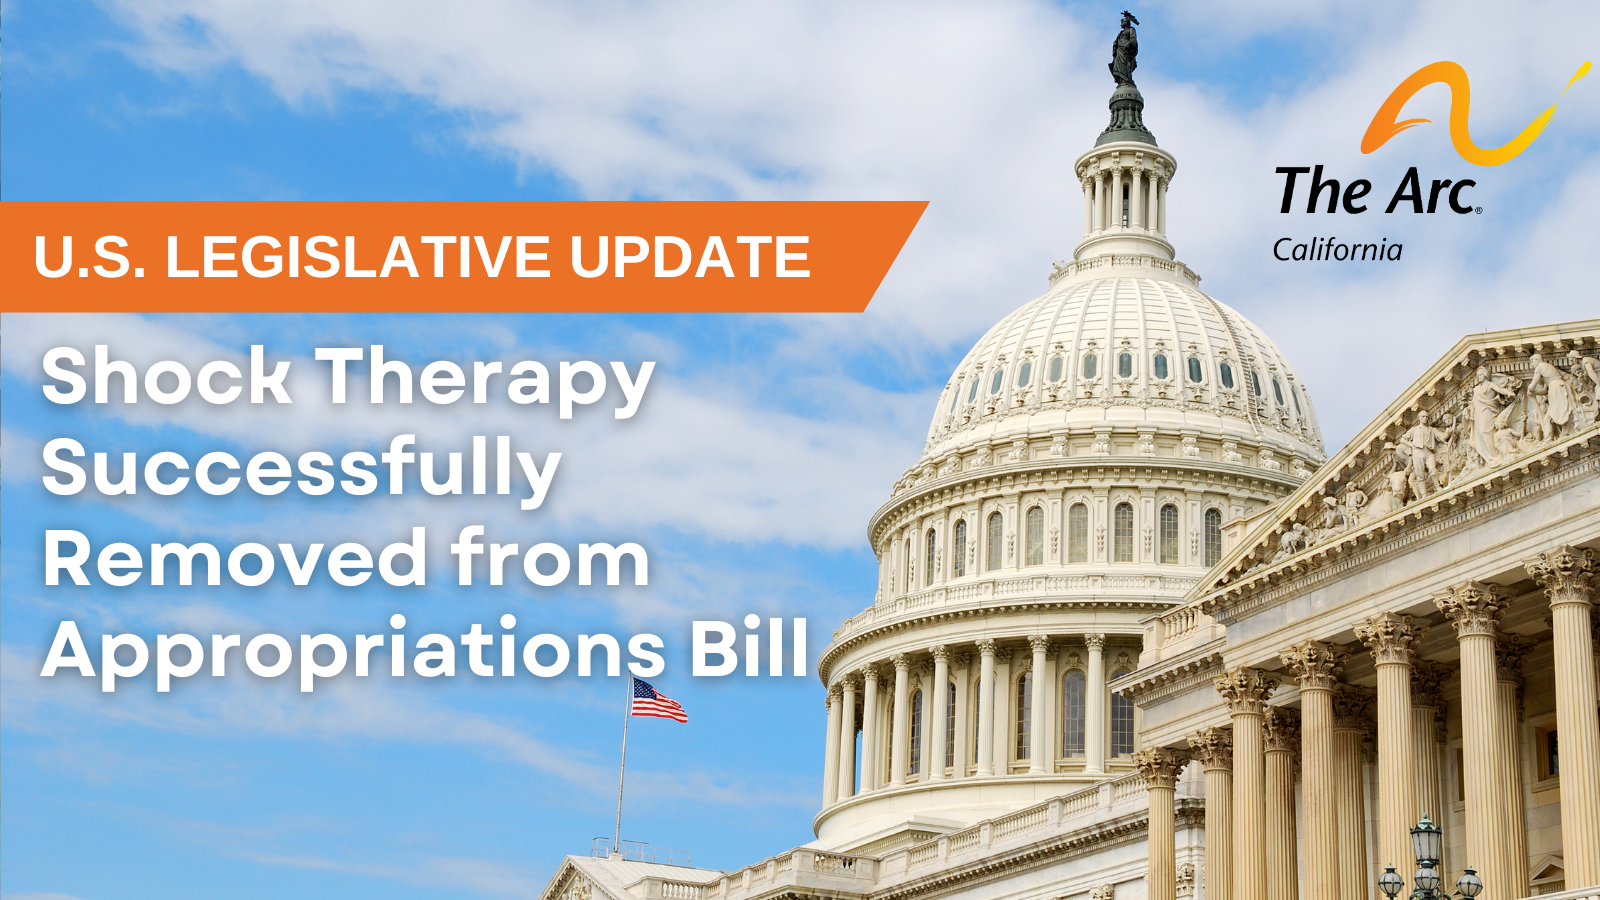 US Legislative Update: Shock Therapy Successfully Removed from Appropriations Bill